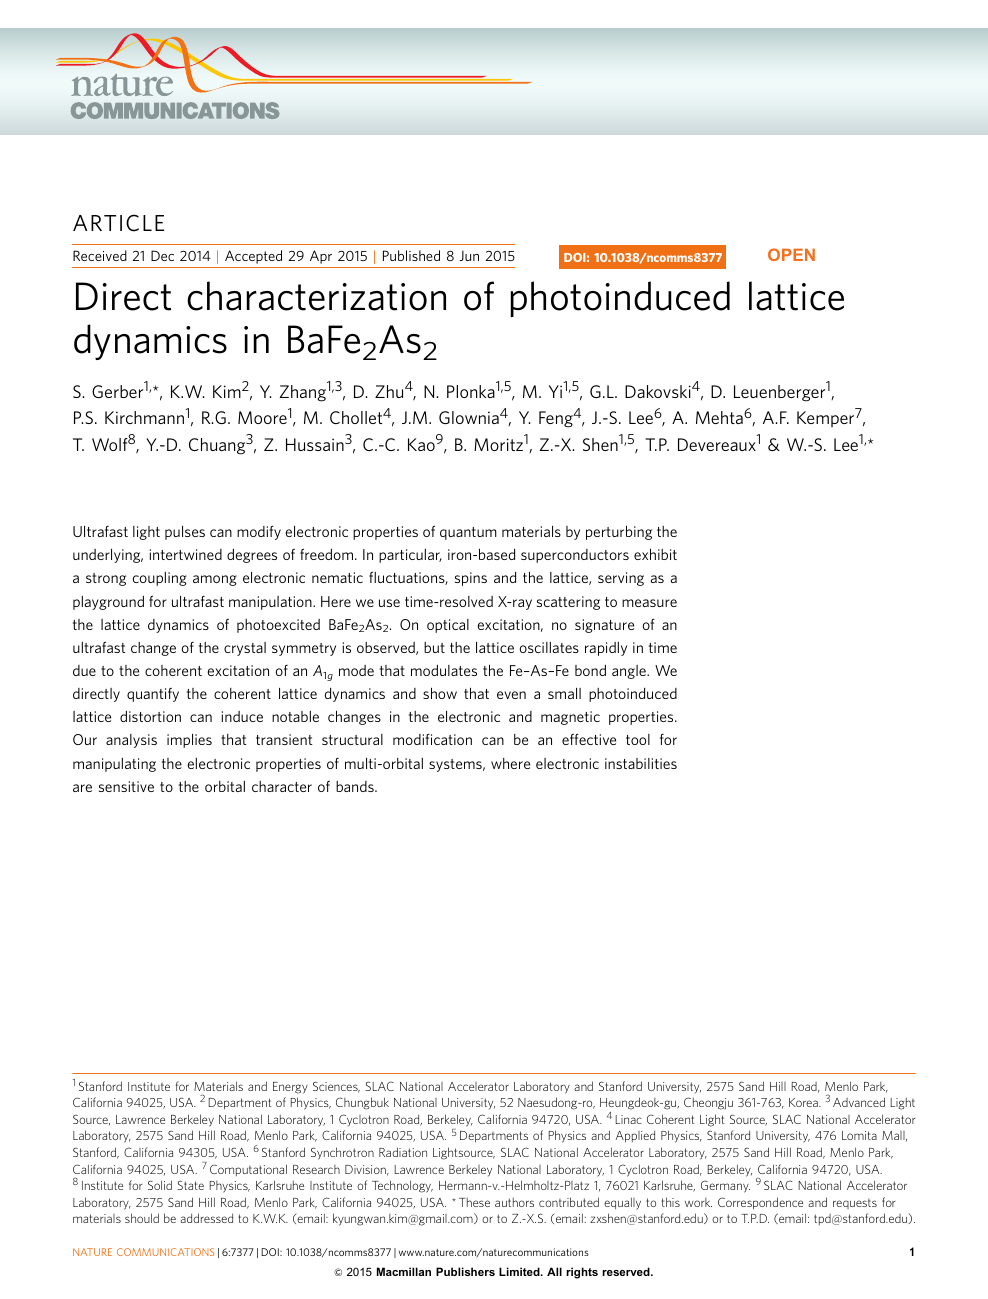 Direct Characterization Of Photoinduced Lattice Dynamics In Bafe2as2 Topic Of Research Paper In Nano Technology Download Scholarly Article Pdf And Read For Free On Cyberleninka Open Science Hub